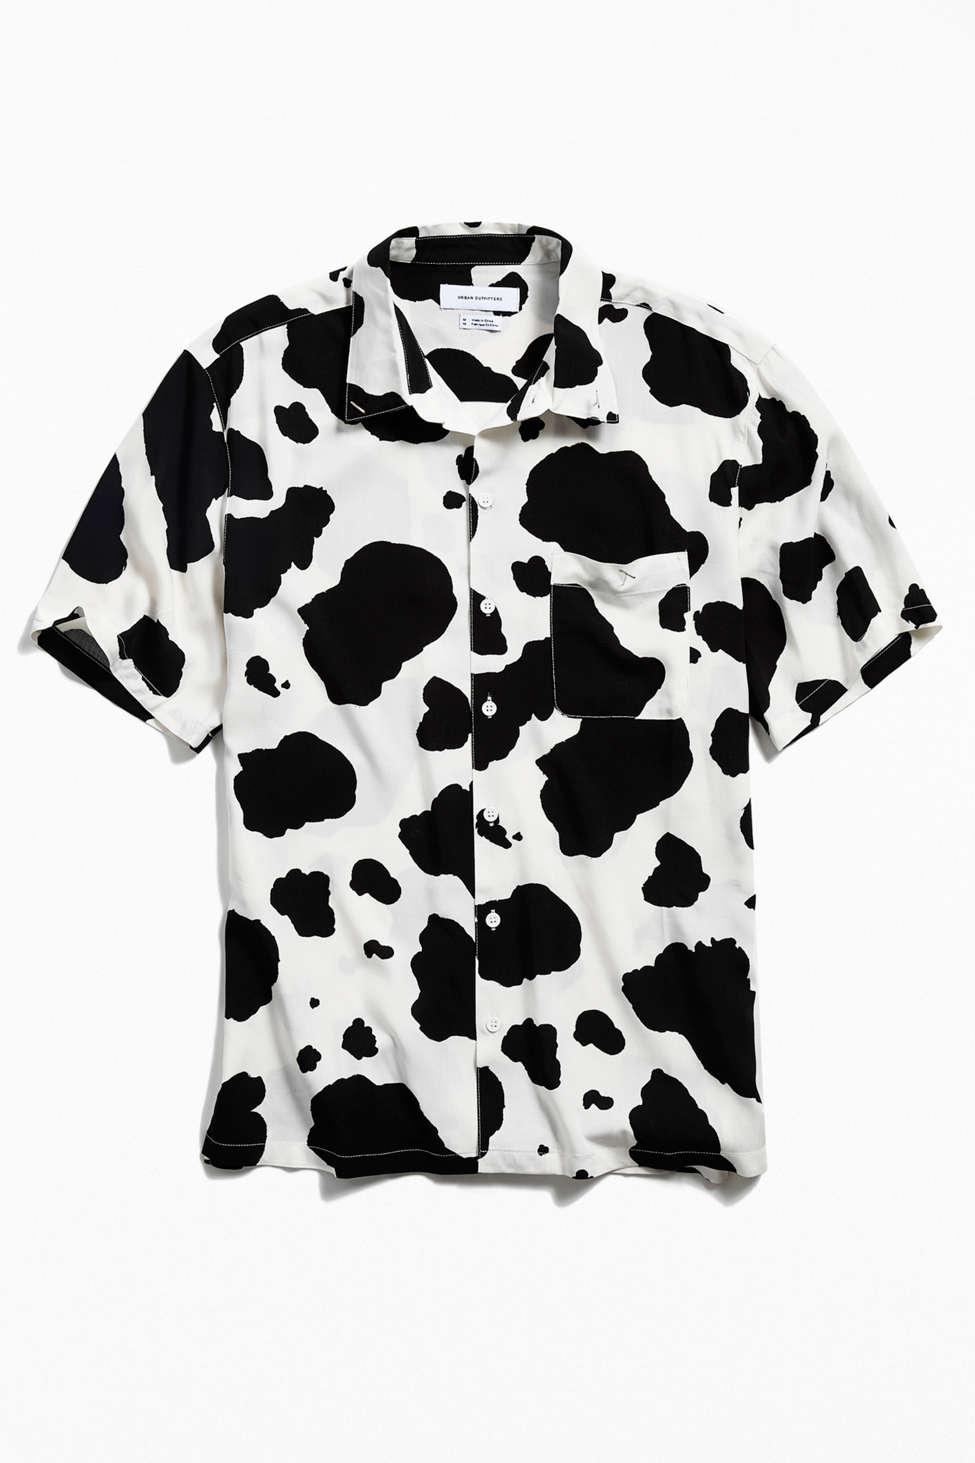 Urban Outfitters Uo Cow Print Short Sleeve Button-down Shirt in Black for  Men - Lyst